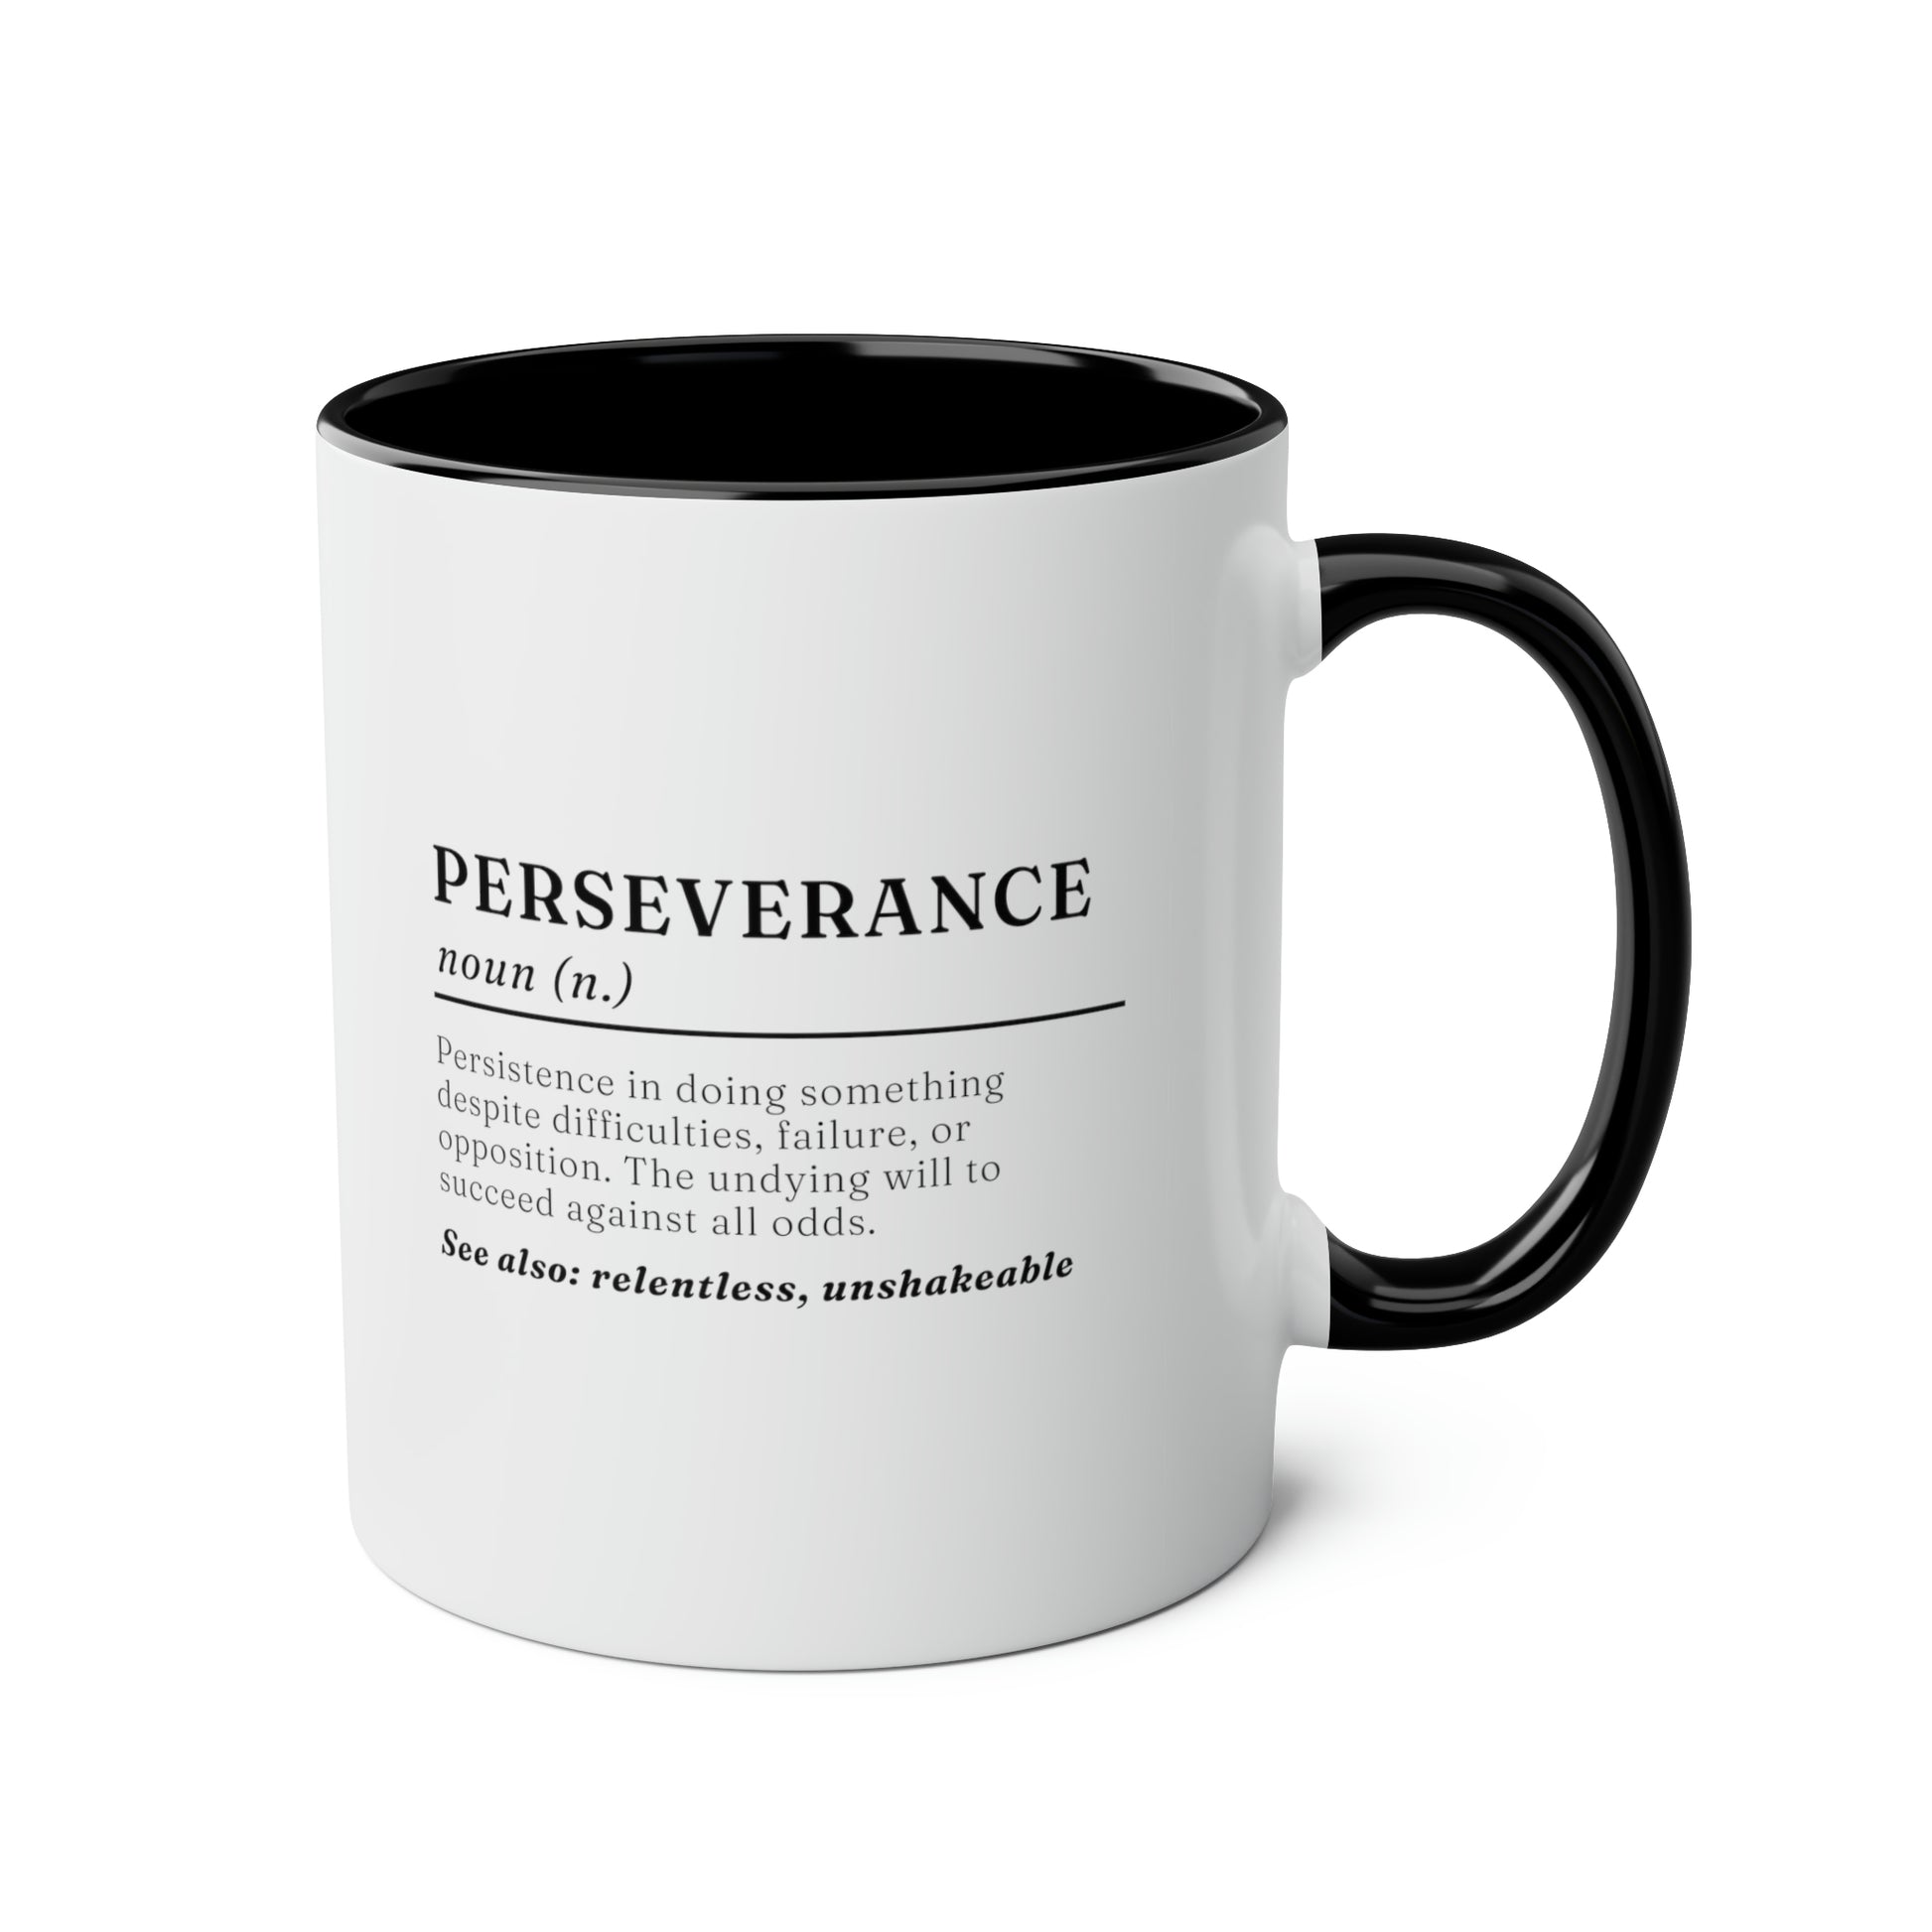 Perseverance Definition 11oz white with black accent funny large coffee mug gift for friend motivational inspirational support resilience tough waveywares wavey wares wavywares wavy wares